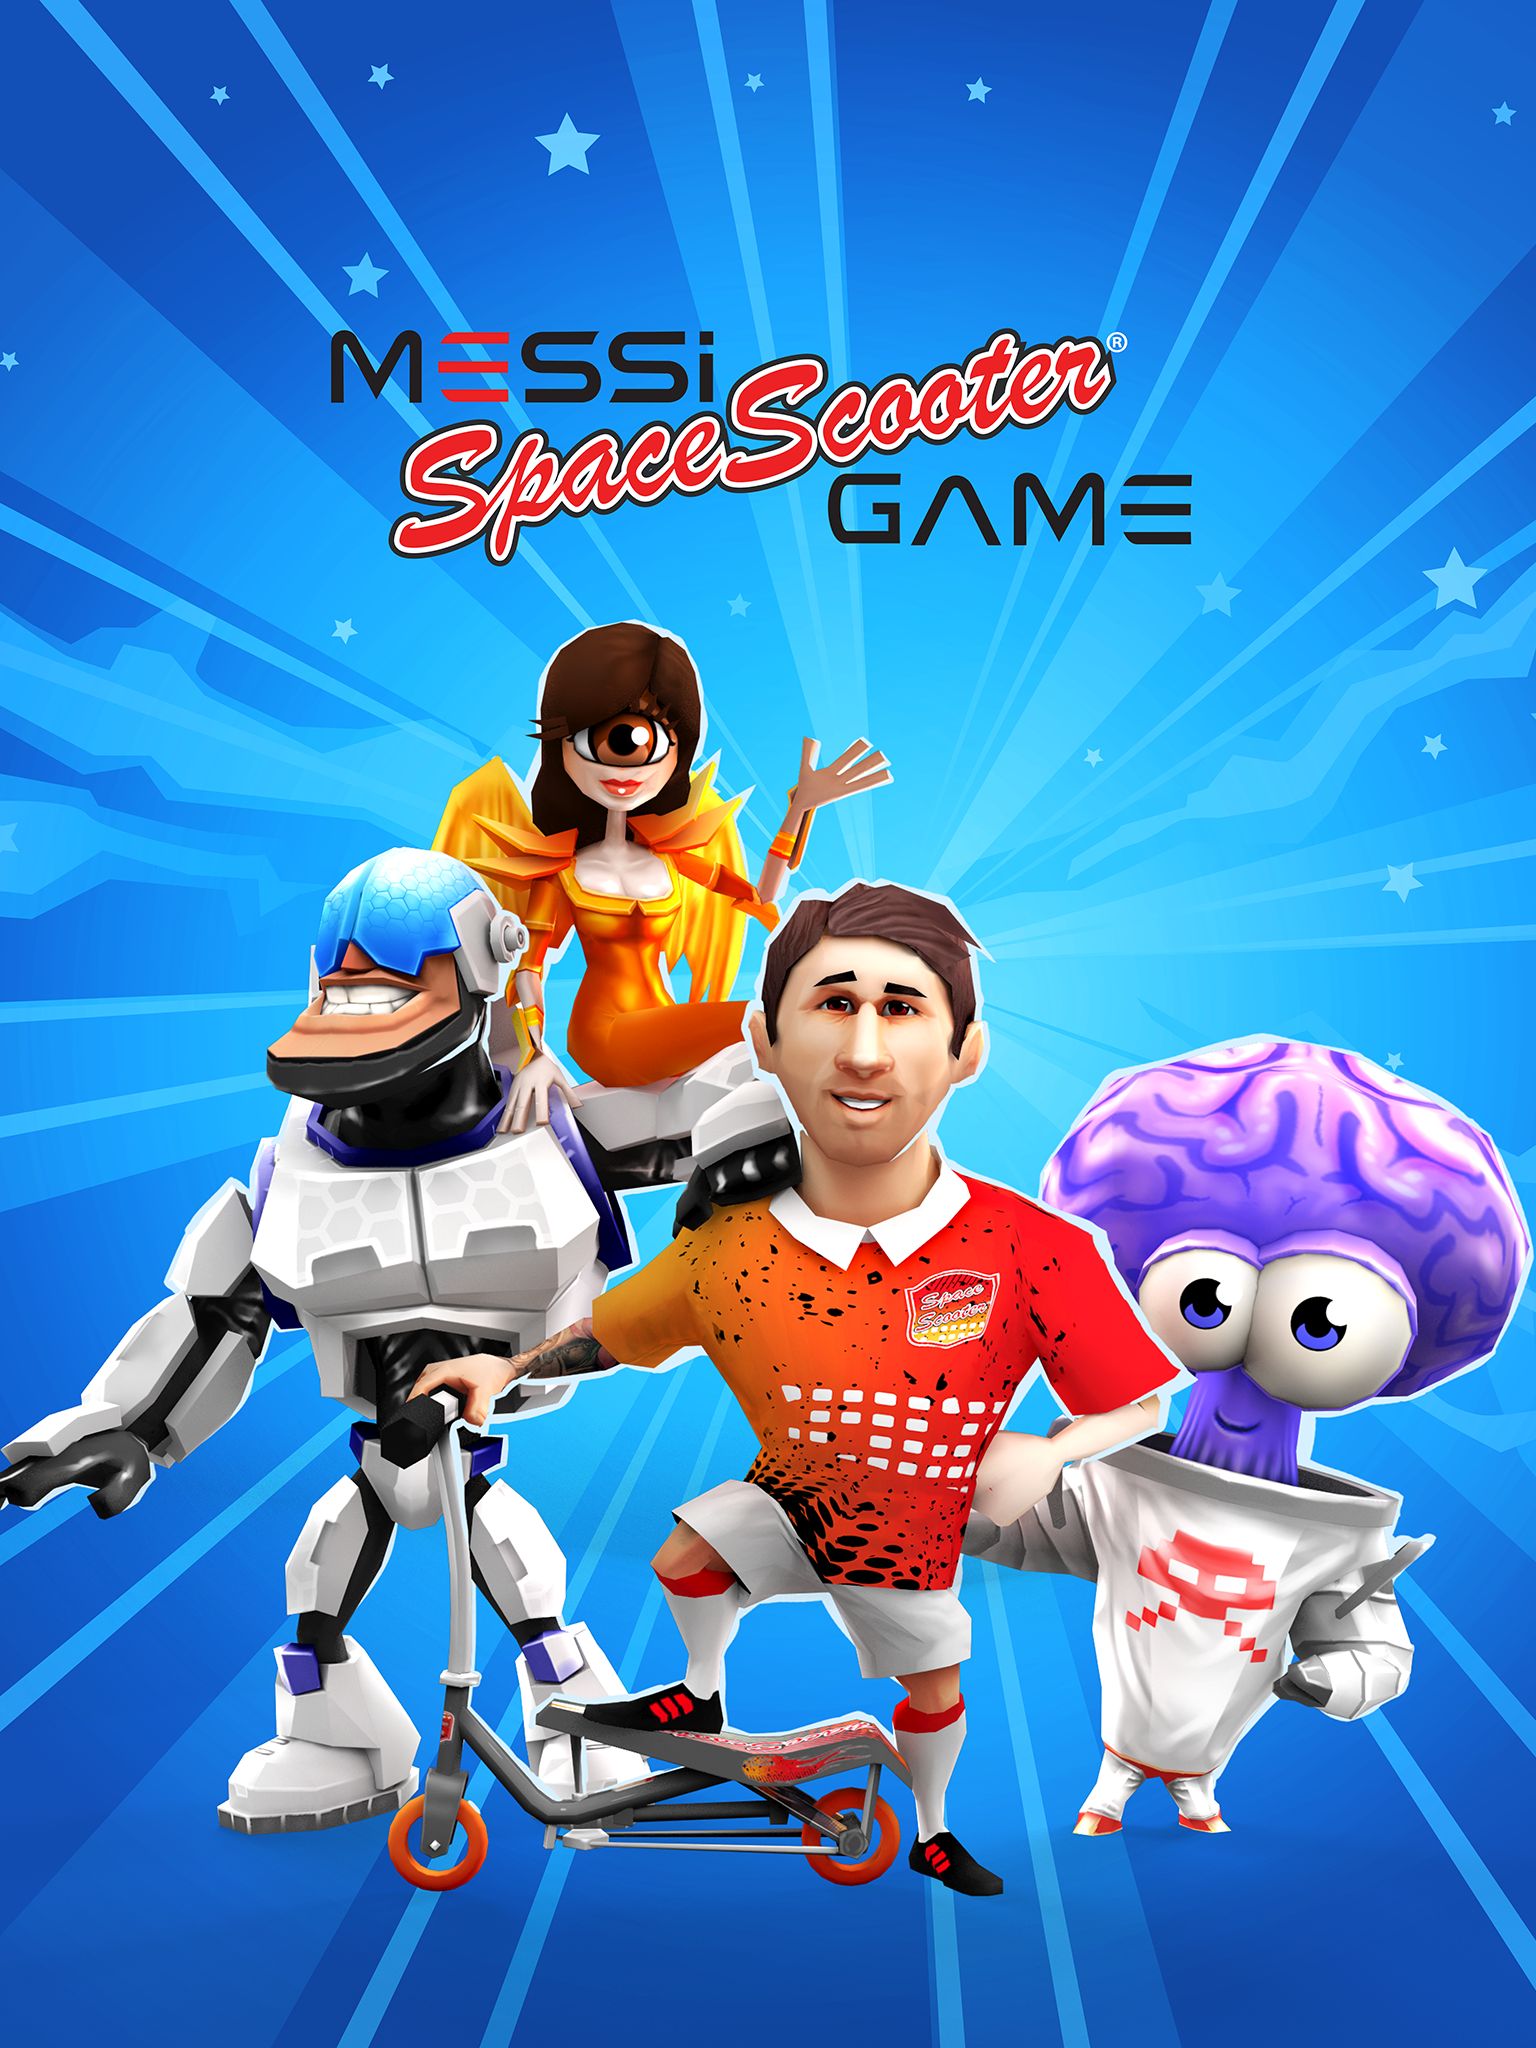 Messi Space Scooter Game